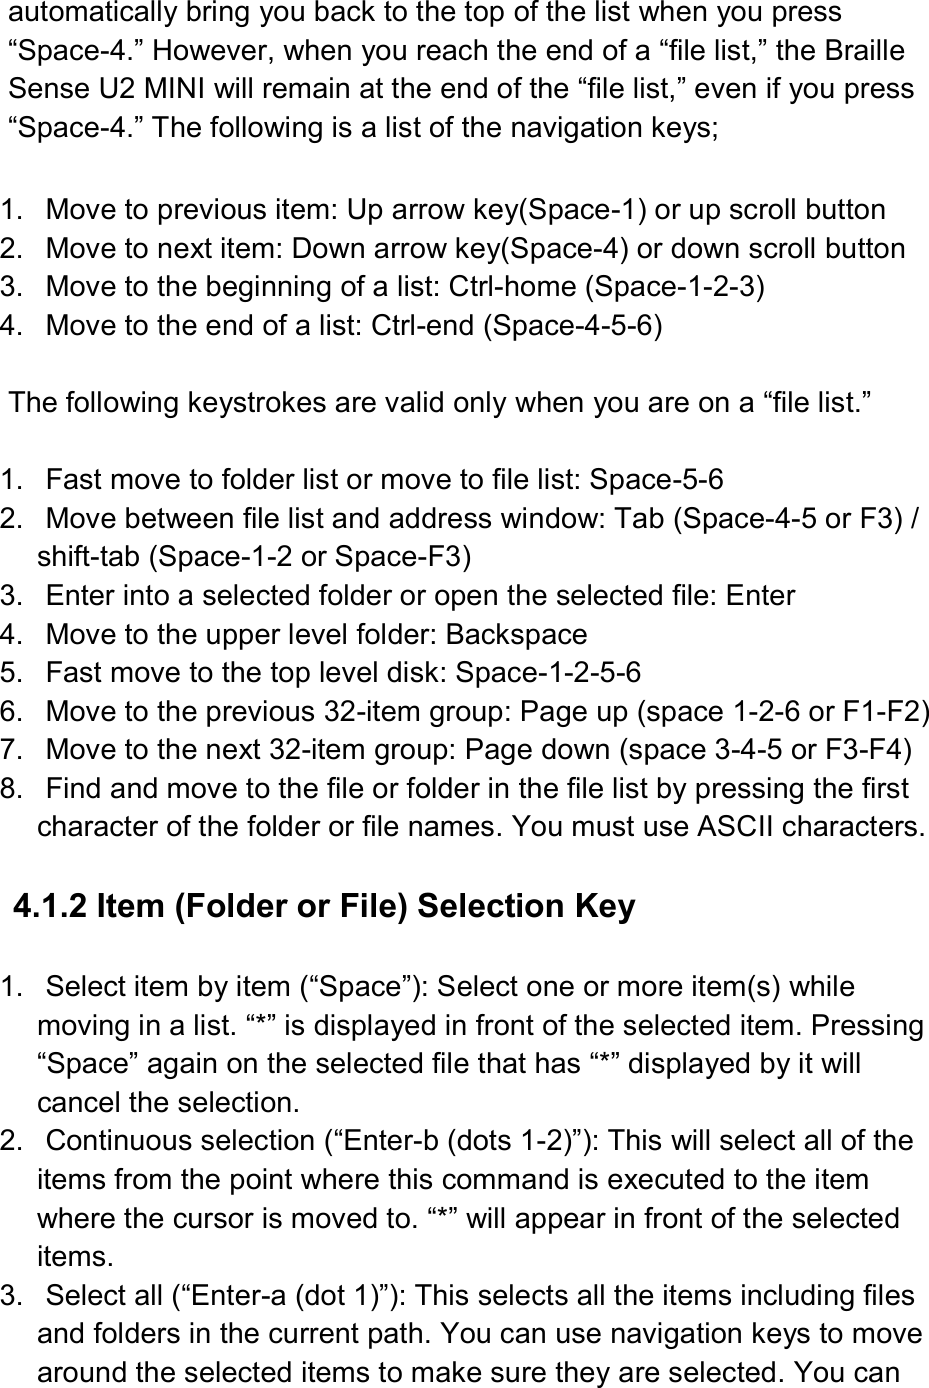  automatically bring you back to the top of the list when you press “Space-4.” However, when you reach the end of a “file list,” the Braille Sense U2 MINI will remain at the end of the “file list,” even if you press “Space-4.” The following is a list of the navigation keys;  1.  Move to previous item: Up arrow key(Space-1) or up scroll button 2.  Move to next item: Down arrow key(Space-4) or down scroll button 3.  Move to the beginning of a list: Ctrl-home (Space-1-2-3) 4.  Move to the end of a list: Ctrl-end (Space-4-5-6)  The following keystrokes are valid only when you are on a “file list.”  1.  Fast move to folder list or move to file list: Space-5-6 2.  Move between file list and address window: Tab (Space-4-5 or F3) / shift-tab (Space-1-2 or Space-F3) 3.  Enter into a selected folder or open the selected file: Enter 4.  Move to the upper level folder: Backspace 5.  Fast move to the top level disk: Space-1-2-5-6 6.  Move to the previous 32-item group: Page up (space 1-2-6 or F1-F2) 7.  Move to the next 32-item group: Page down (space 3-4-5 or F3-F4) 8.  Find and move to the file or folder in the file list by pressing the first character of the folder or file names. You must use ASCII characters.  4.1.2 Item (Folder or File) Selection Key    1.  Select item by item (“Space”): Select one or more item(s) while moving in a list. “*” is displayed in front of the selected item. Pressing “Space” again on the selected file that has “*” displayed by it will cancel the selection. 2.  Continuous selection (“Enter-b (dots 1-2)”): This will select all of the items from the point where this command is executed to the item where the cursor is moved to. “*” will appear in front of the selected items. 3.  Select all (“Enter-a (dot 1)”): This selects all the items including files and folders in the current path. You can use navigation keys to move around the selected items to make sure they are selected. You can 